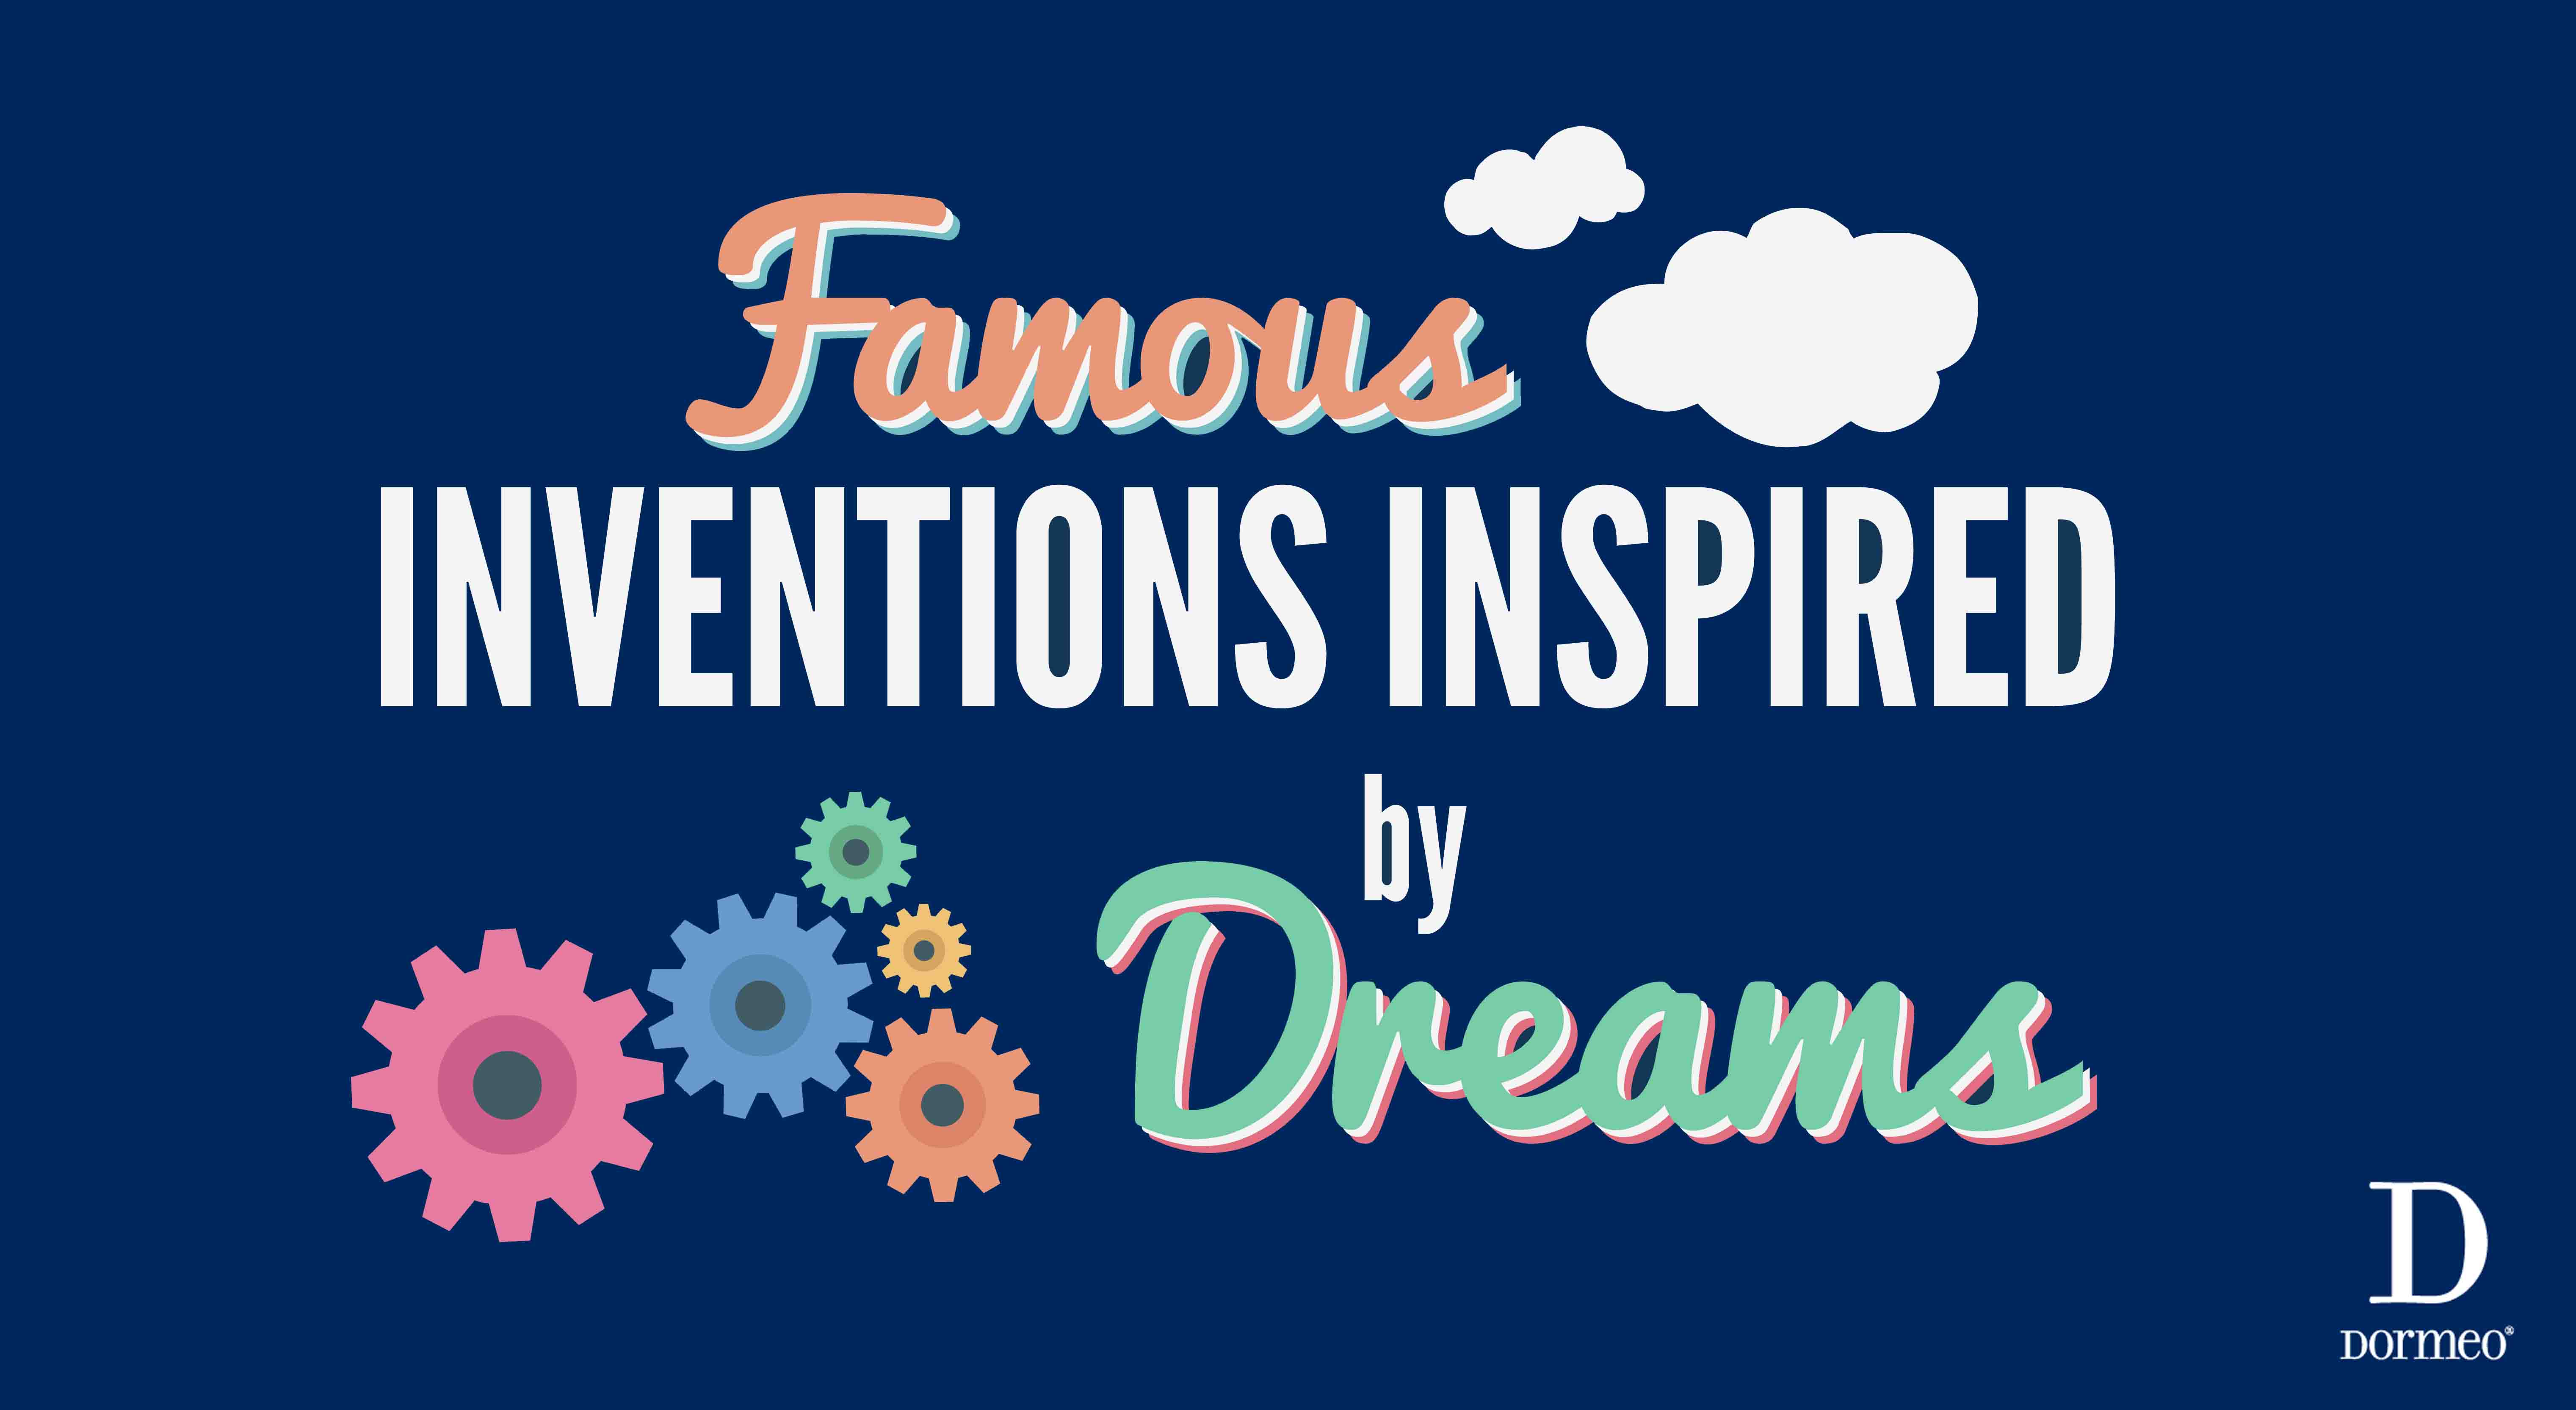 9 Famous Inventions Inspired By Dreams - Infographic